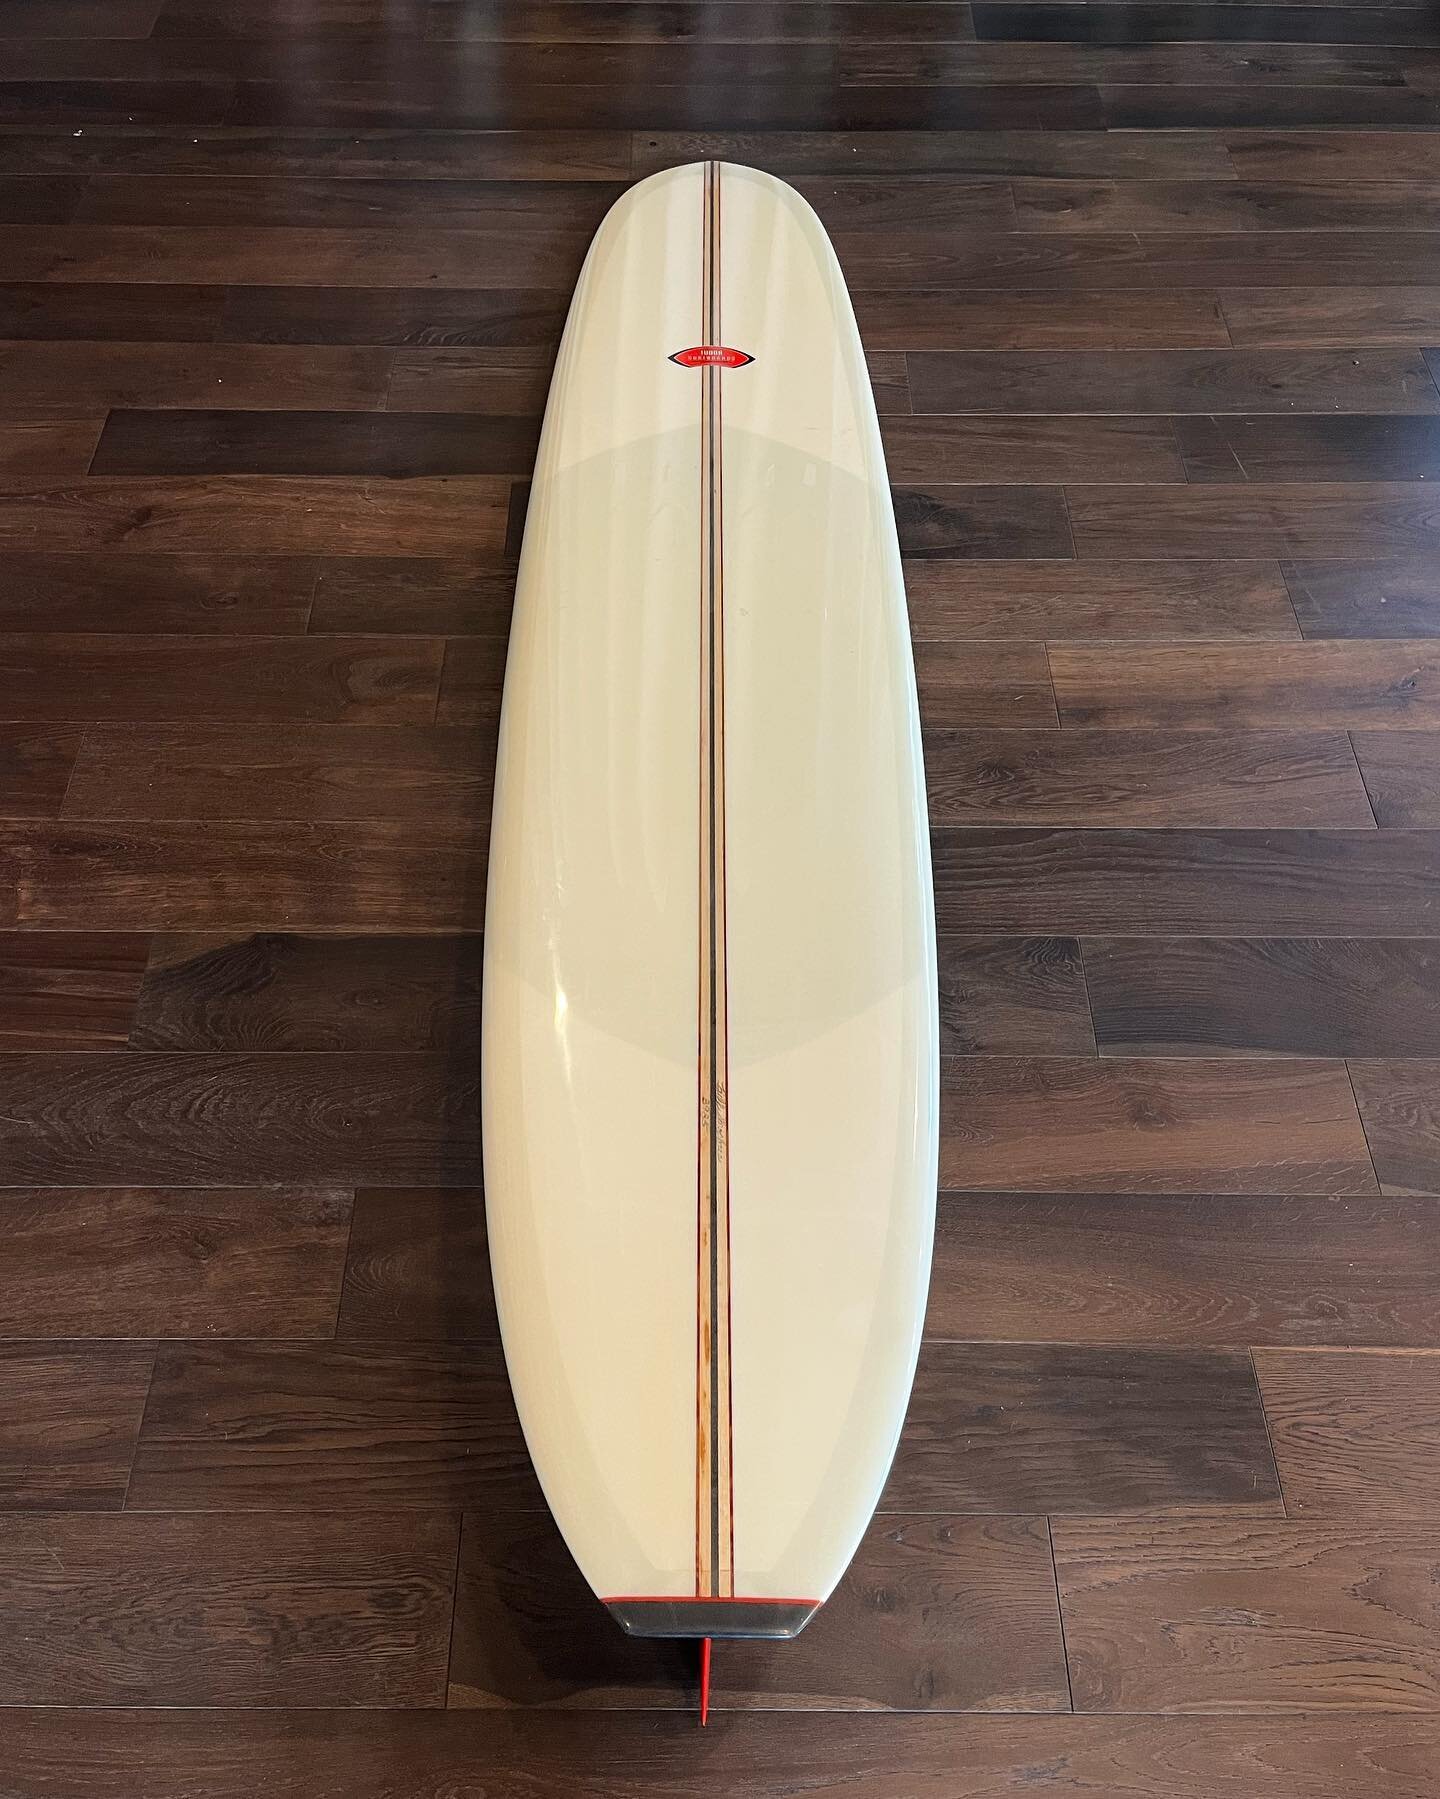 USED BOARDS: 

&bull; 9&rsquo;0 Nuuhiwa Noserider by Joel Tudor/Bing with glassed-in fin 
&bull; 9&rsquo;5 Noserider by Crime with fin and leash 
&bull; 7&rsquo;8 Alpha Pin by Bing 
&bull; 6&rsquo;2 Single Fin by Roger Hinds 
&bull; 8&rsquo;11 Pig by